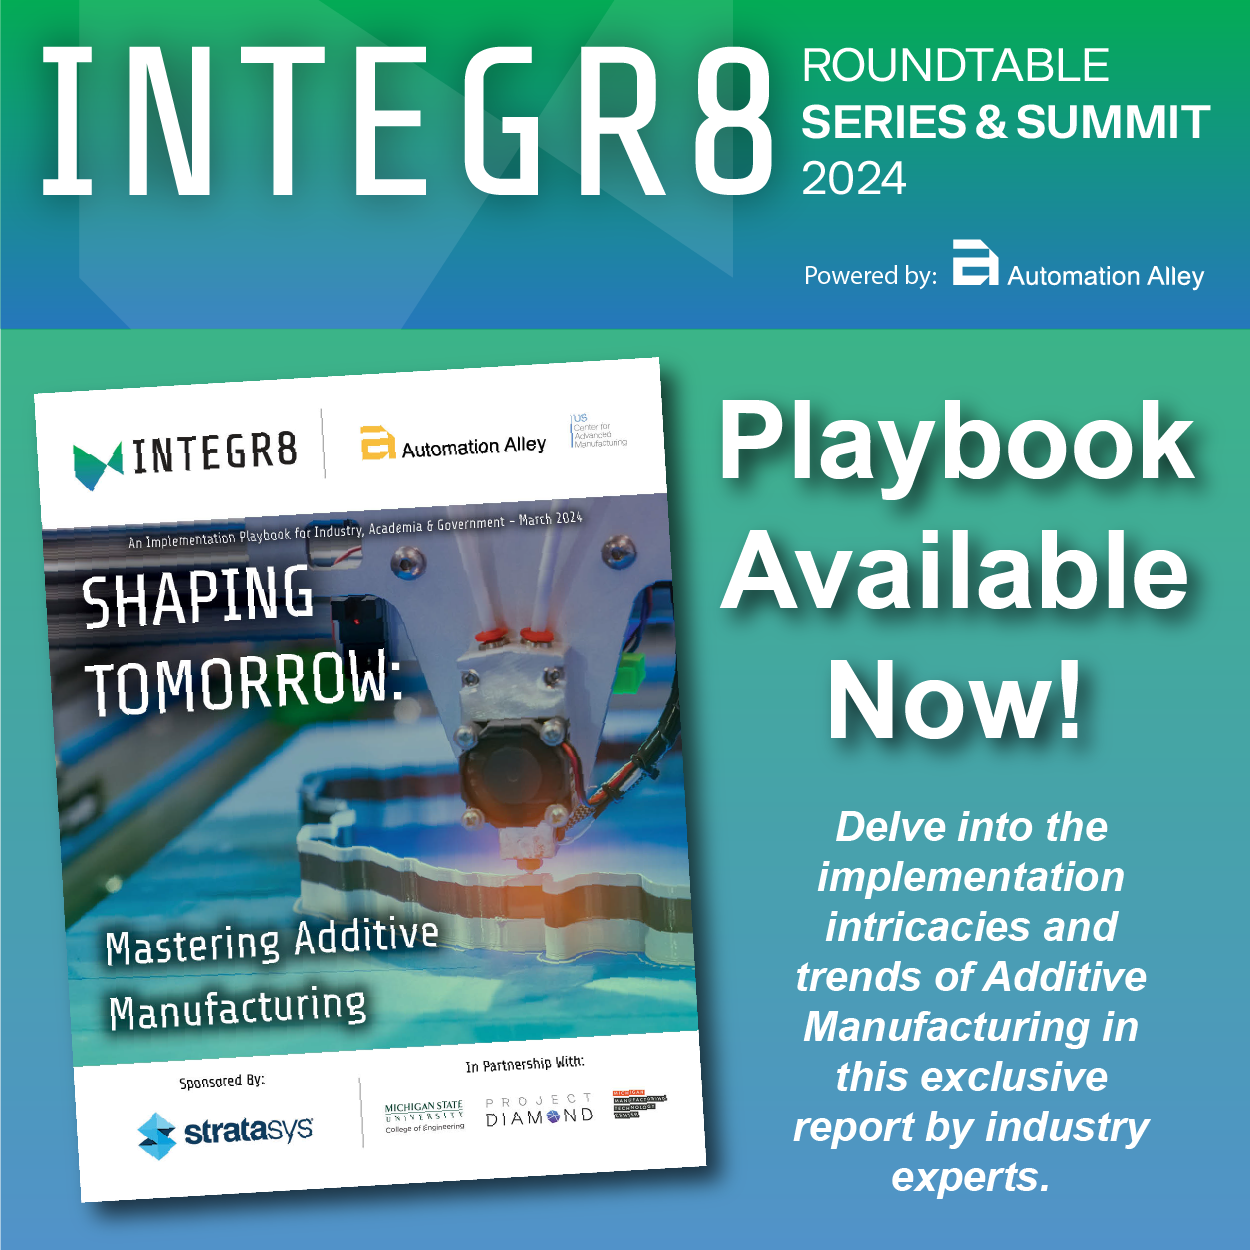 Integr8 Roundtable Playbook